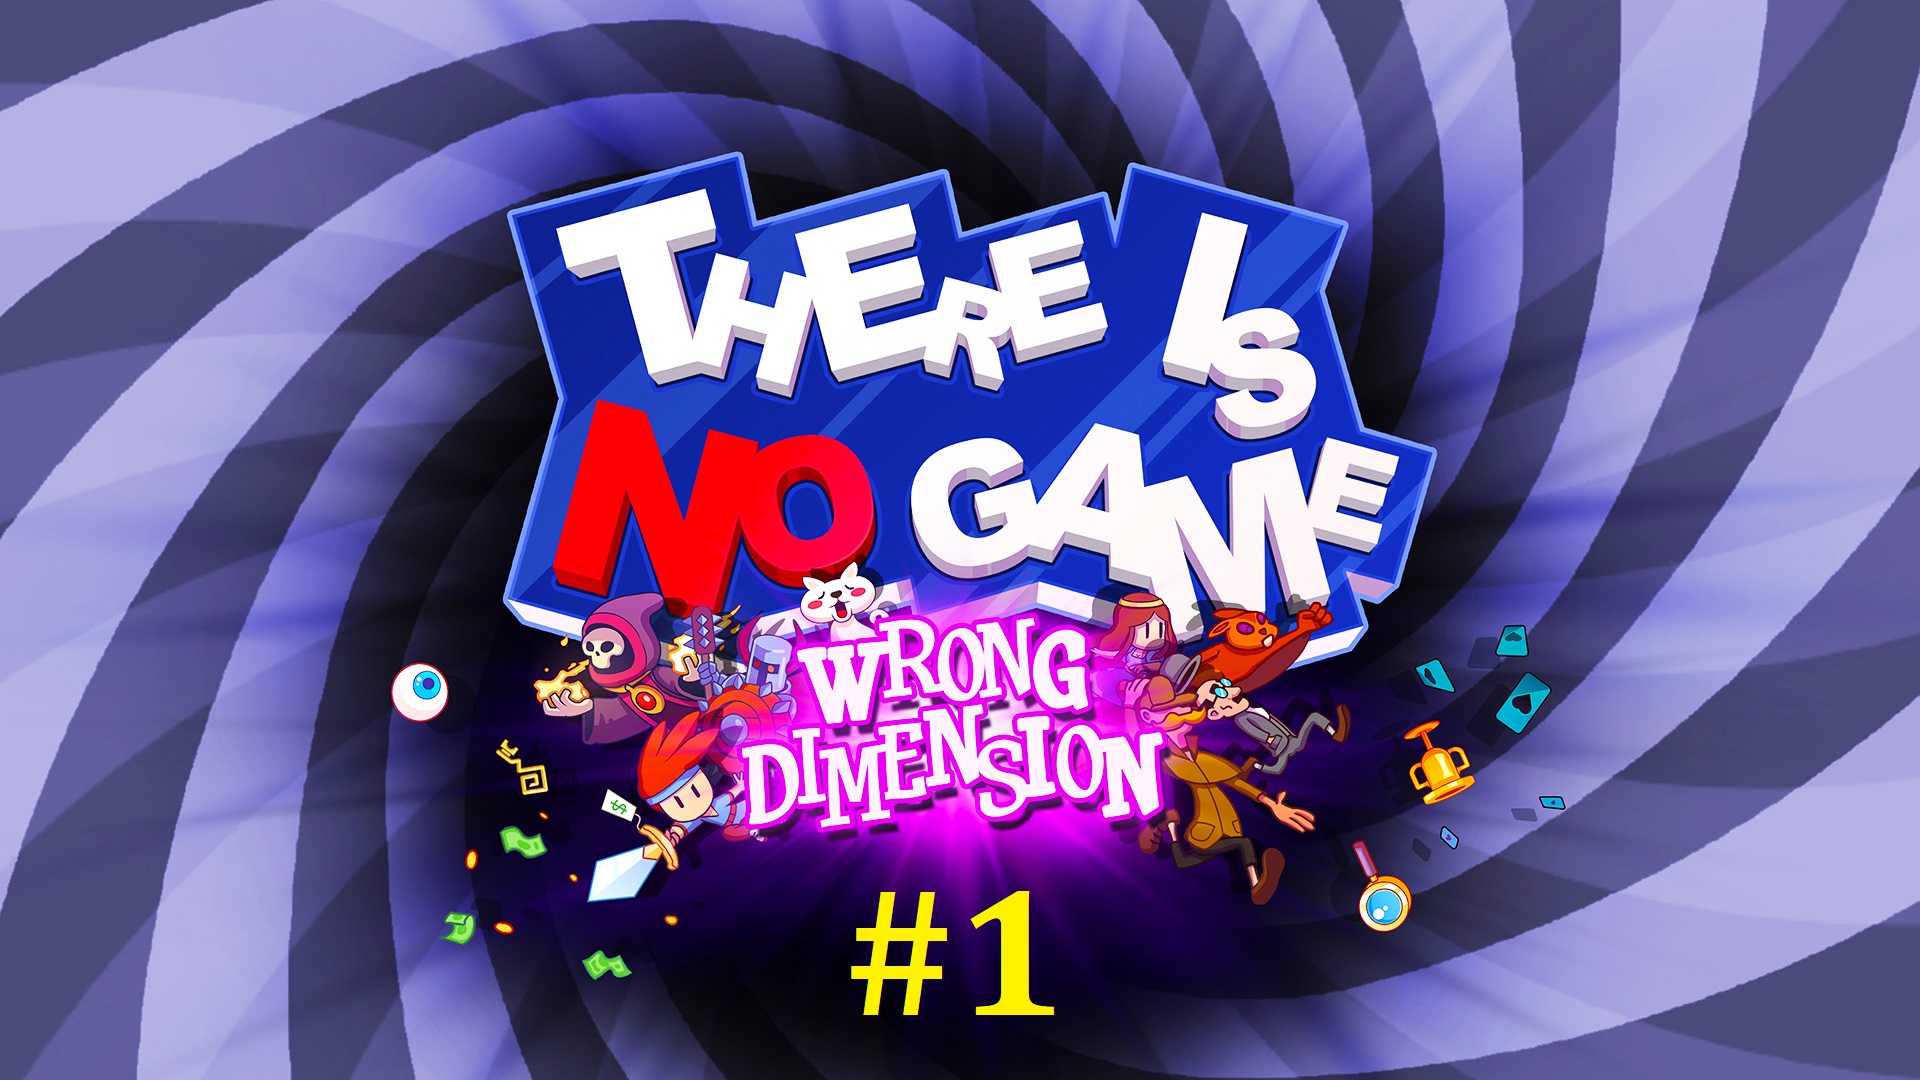 There is no game: wrong Dimension. There is no game - wrong Dimension код. There is no game dimensions